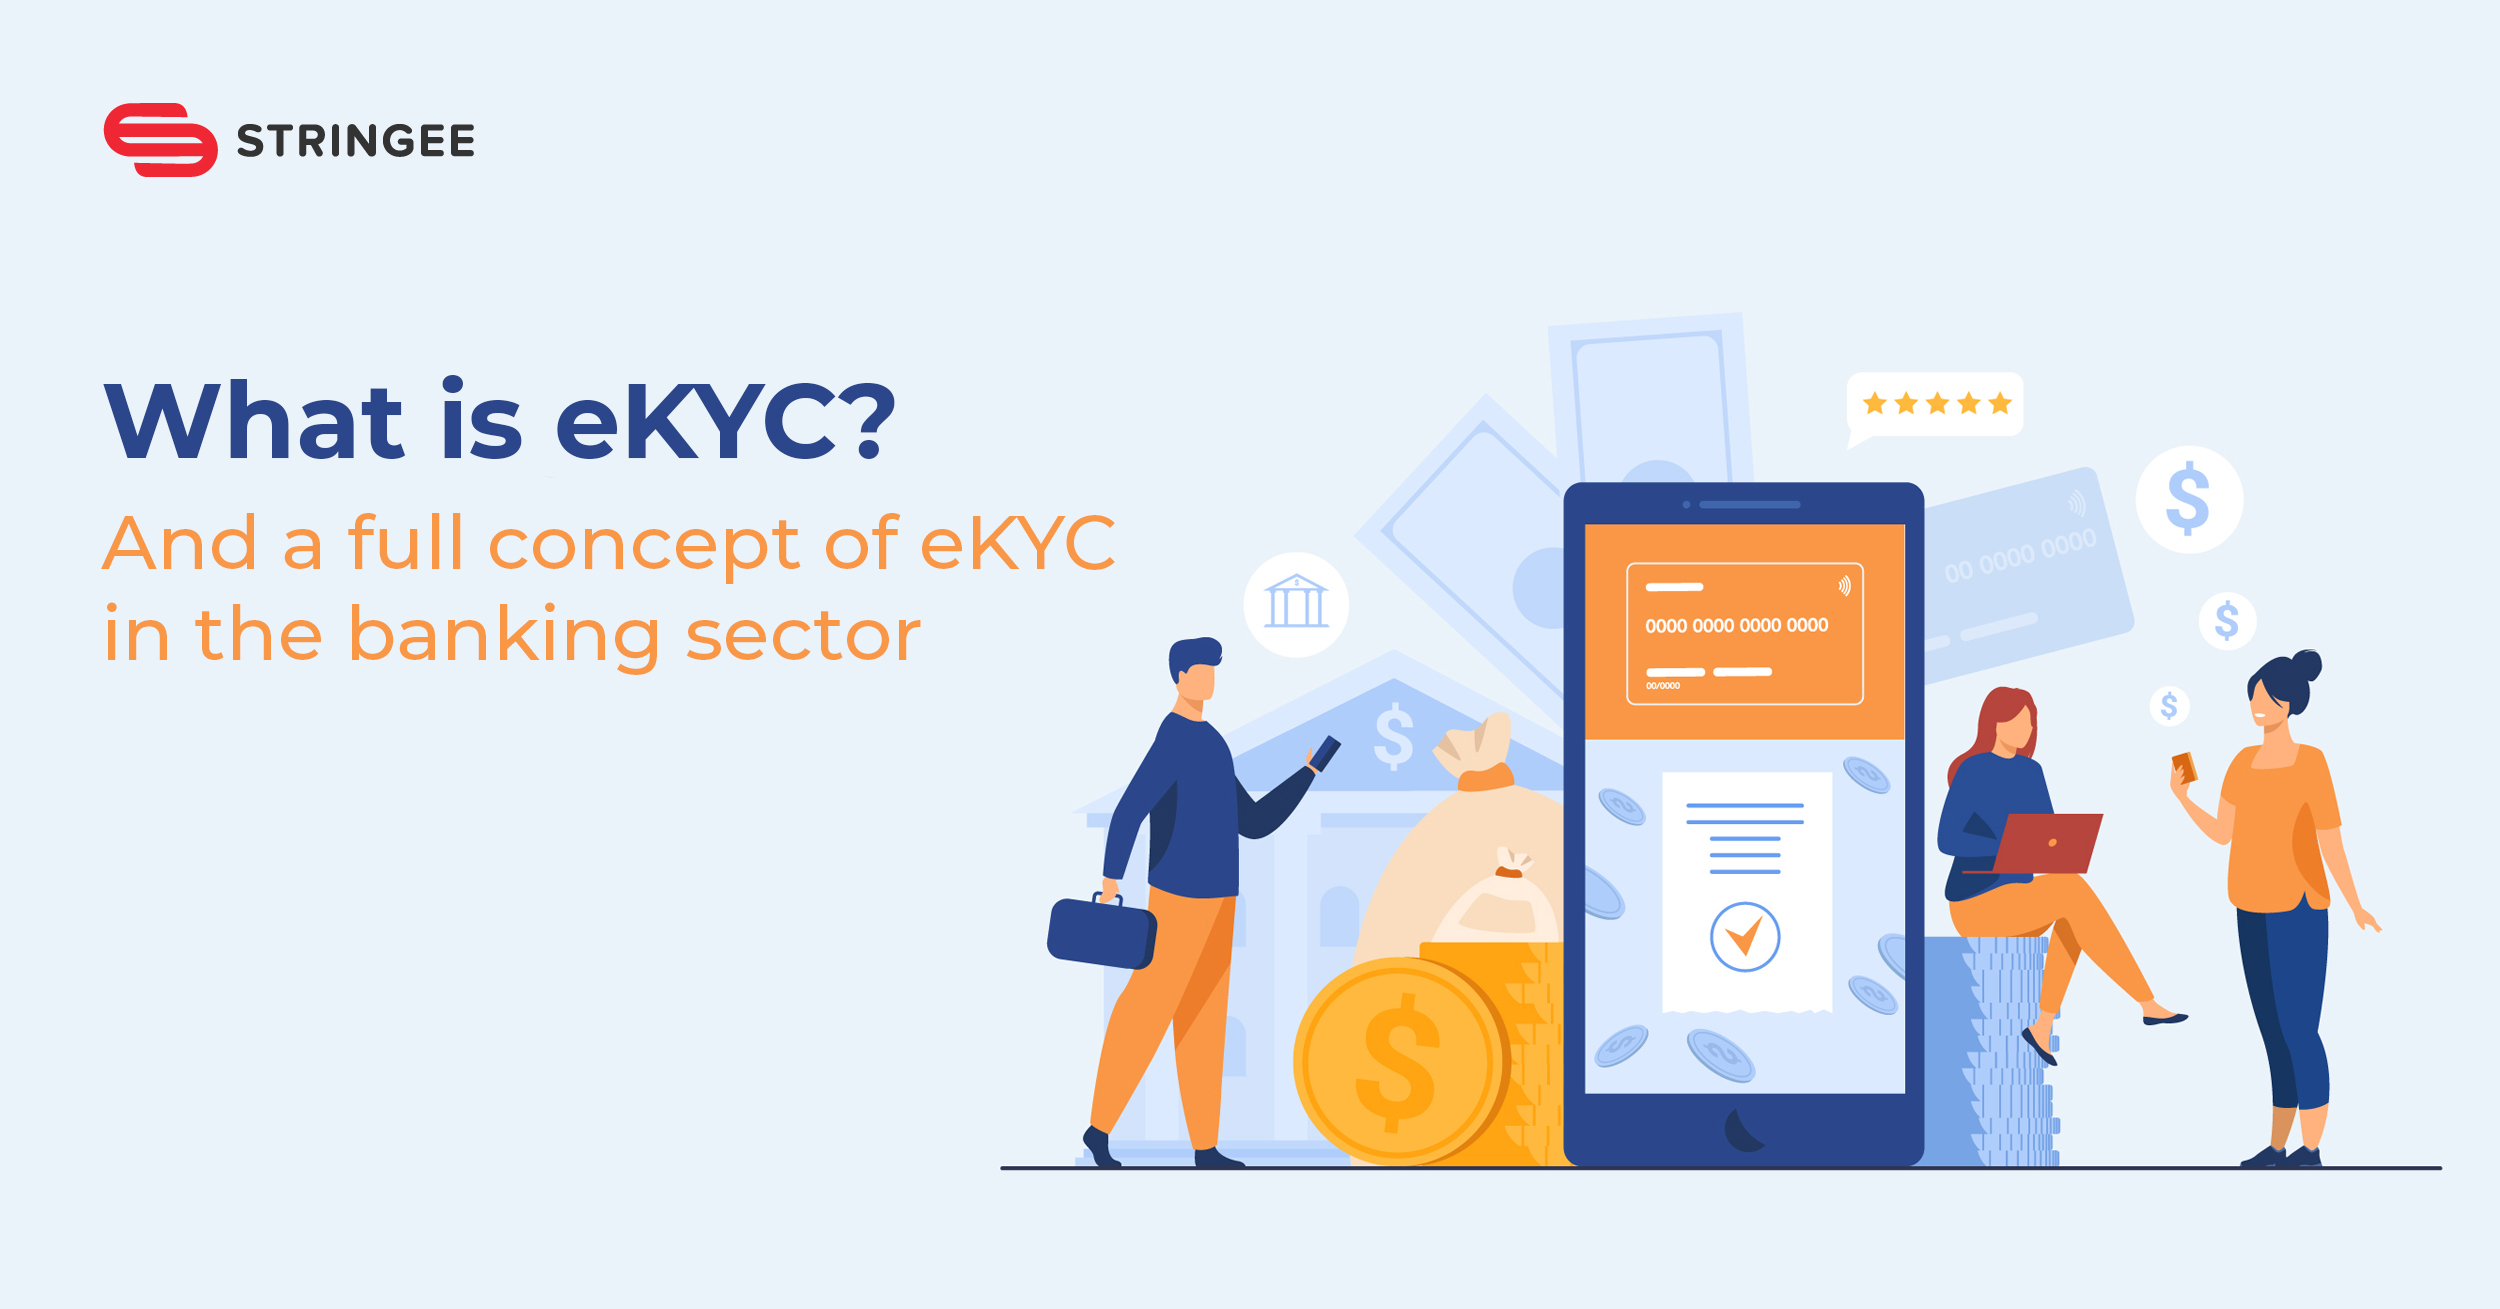 What is eKYC? And a full concept of eKYC in the banking sector